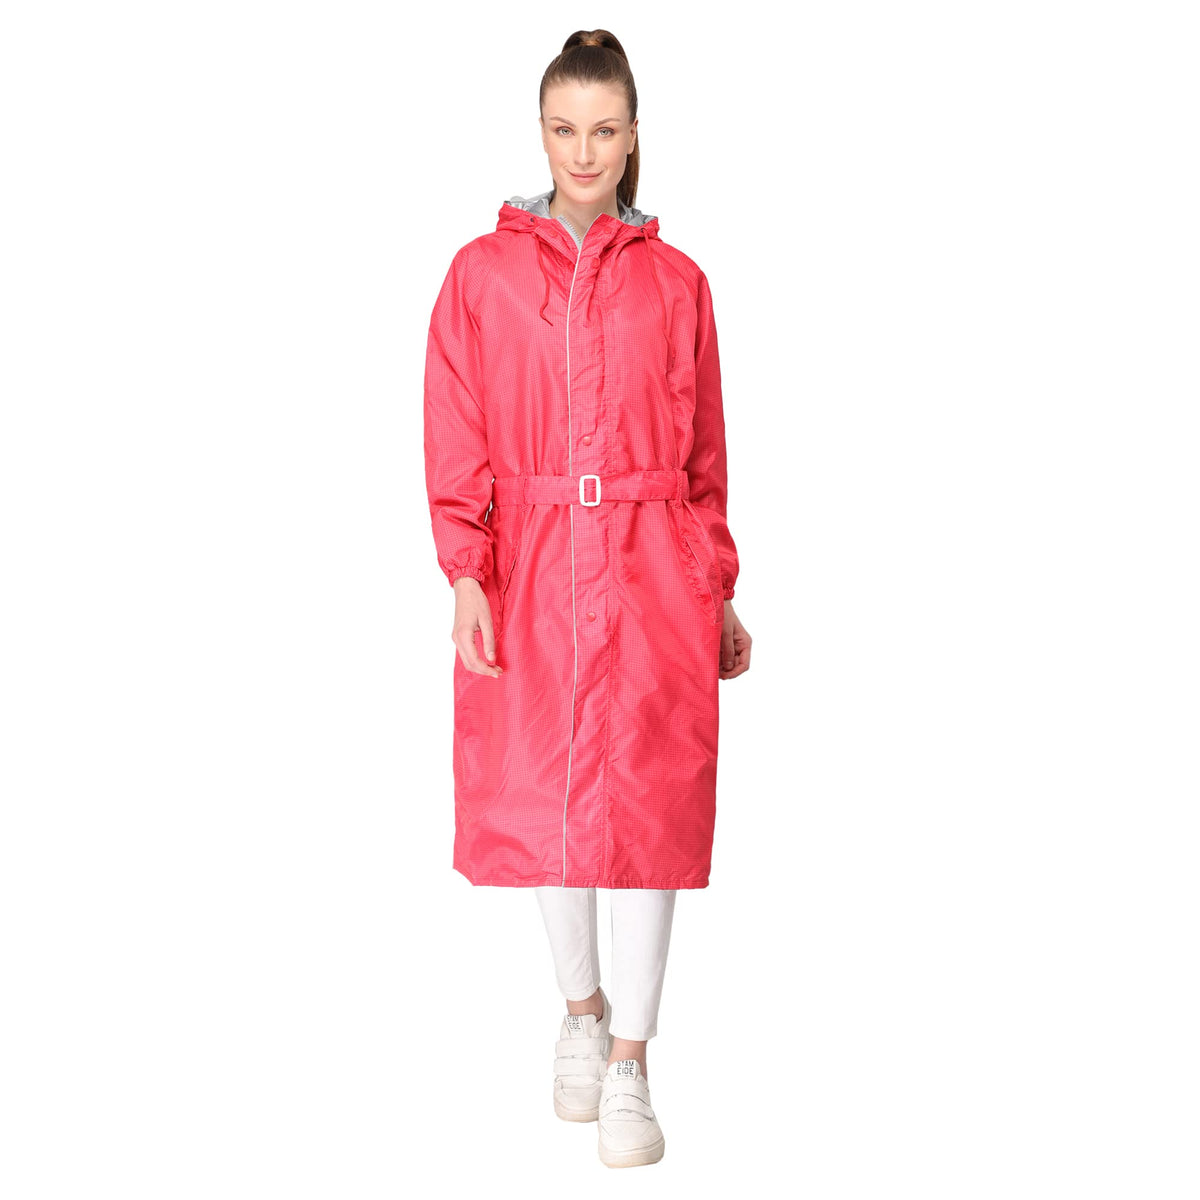 The Clownfish by STRAUSS Raincoats for Women Waterproof Reversible Double Layer. Brilliant Pro Series (Red, XX-Large)